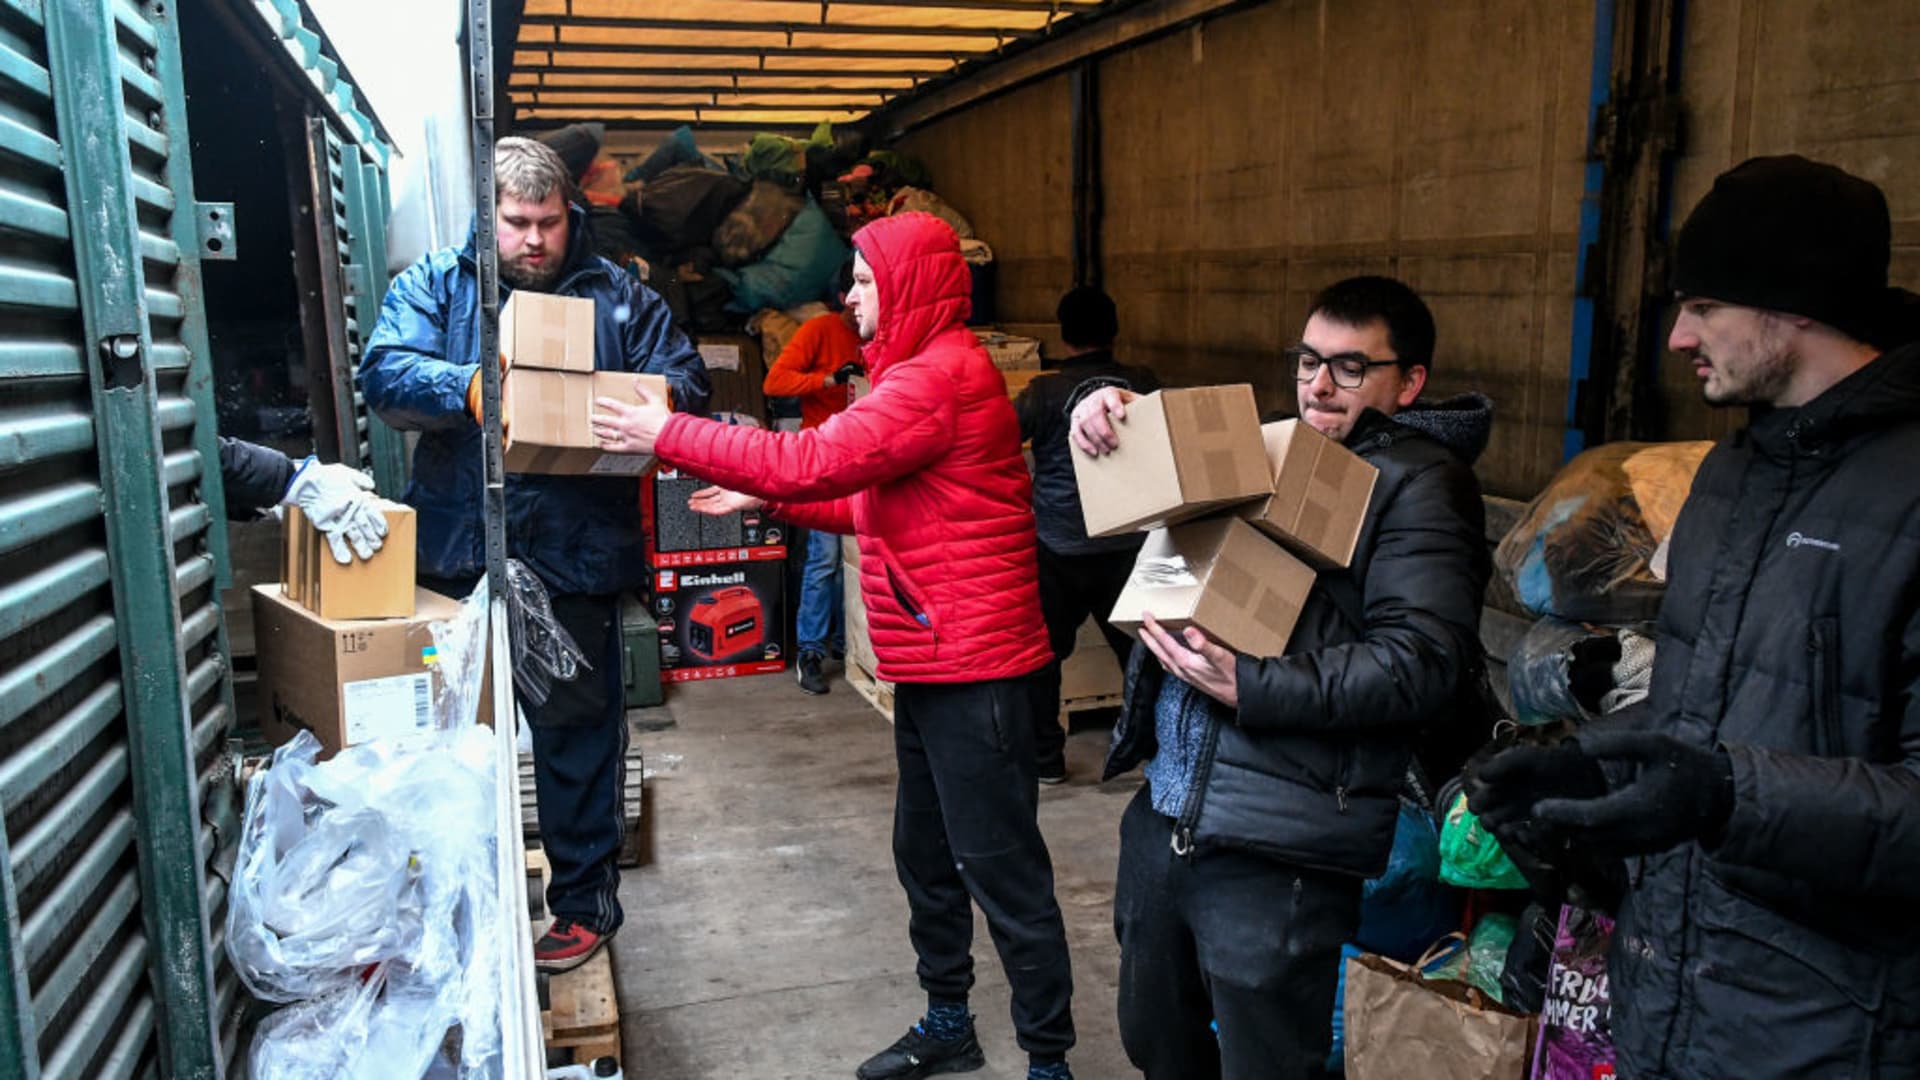 Volunteers and team members carry humanitarian aid packages arrived from Lviv, in Zaporizhzhia, Ukraine amid Russian attacks on March 5, 2022.